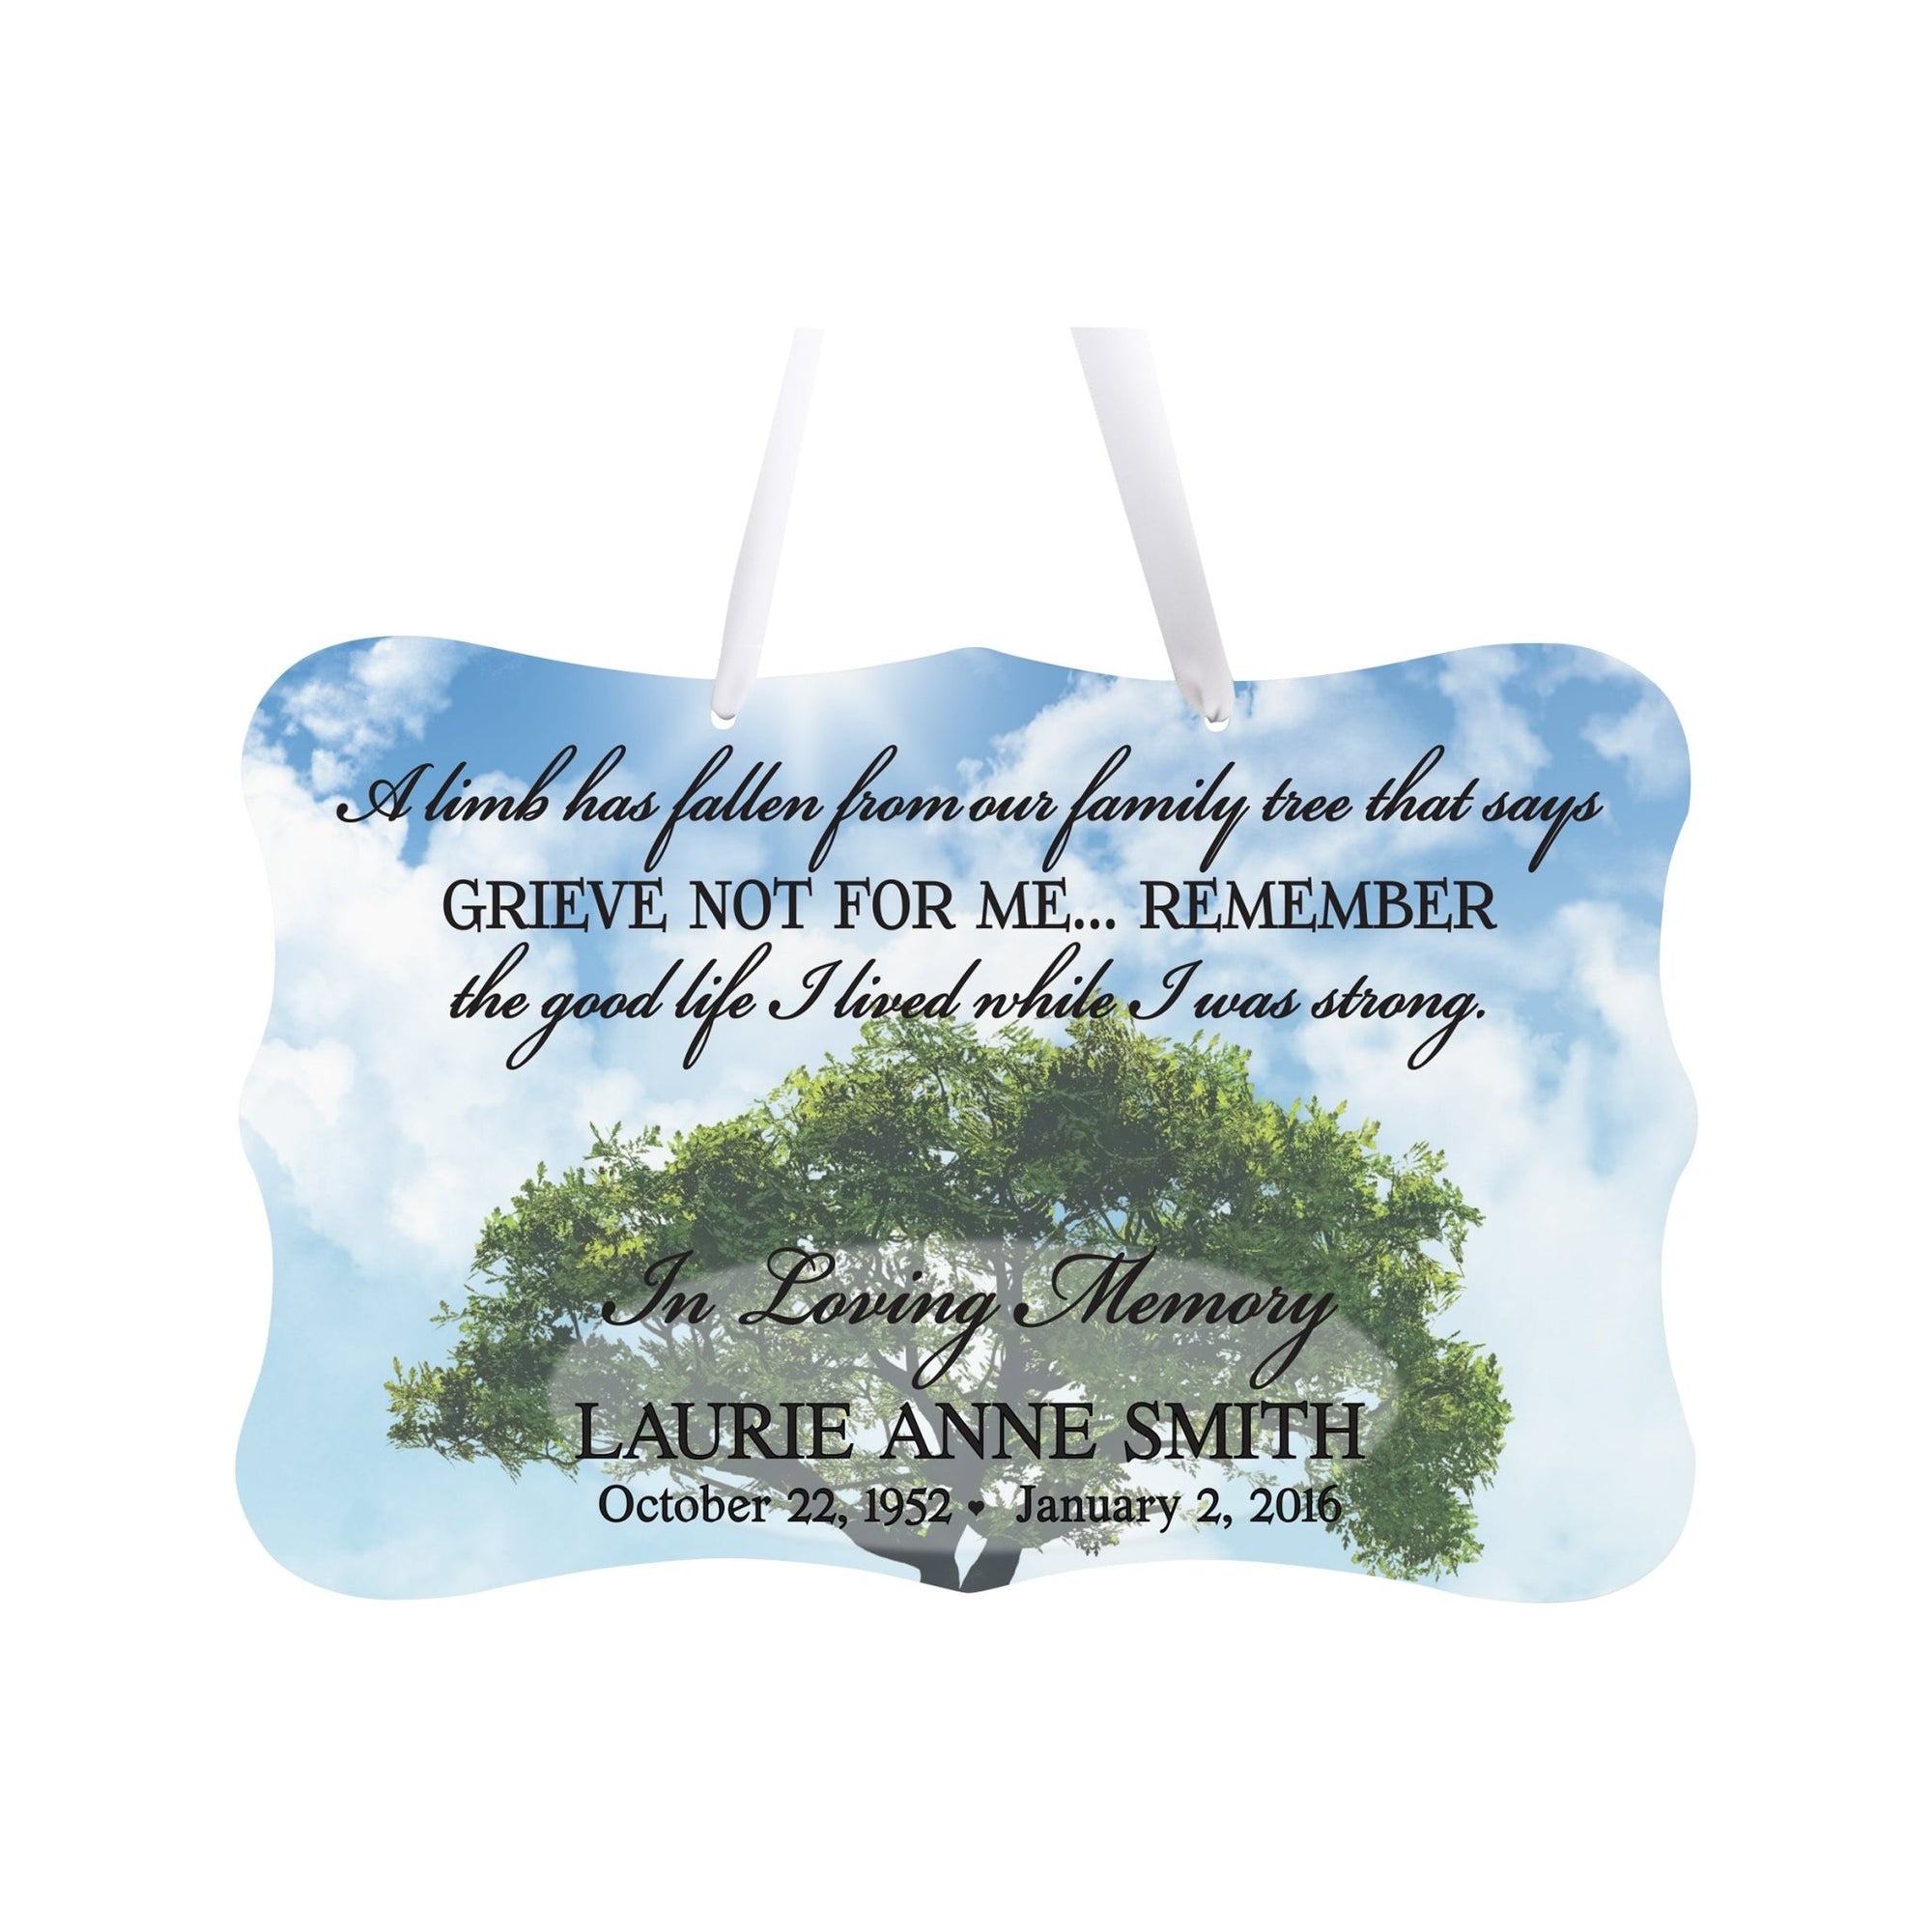 Personalized Inspiring Memorial Scalloped Ribbon Sign 8x12in - A limb has fallen - LifeSong Milestones